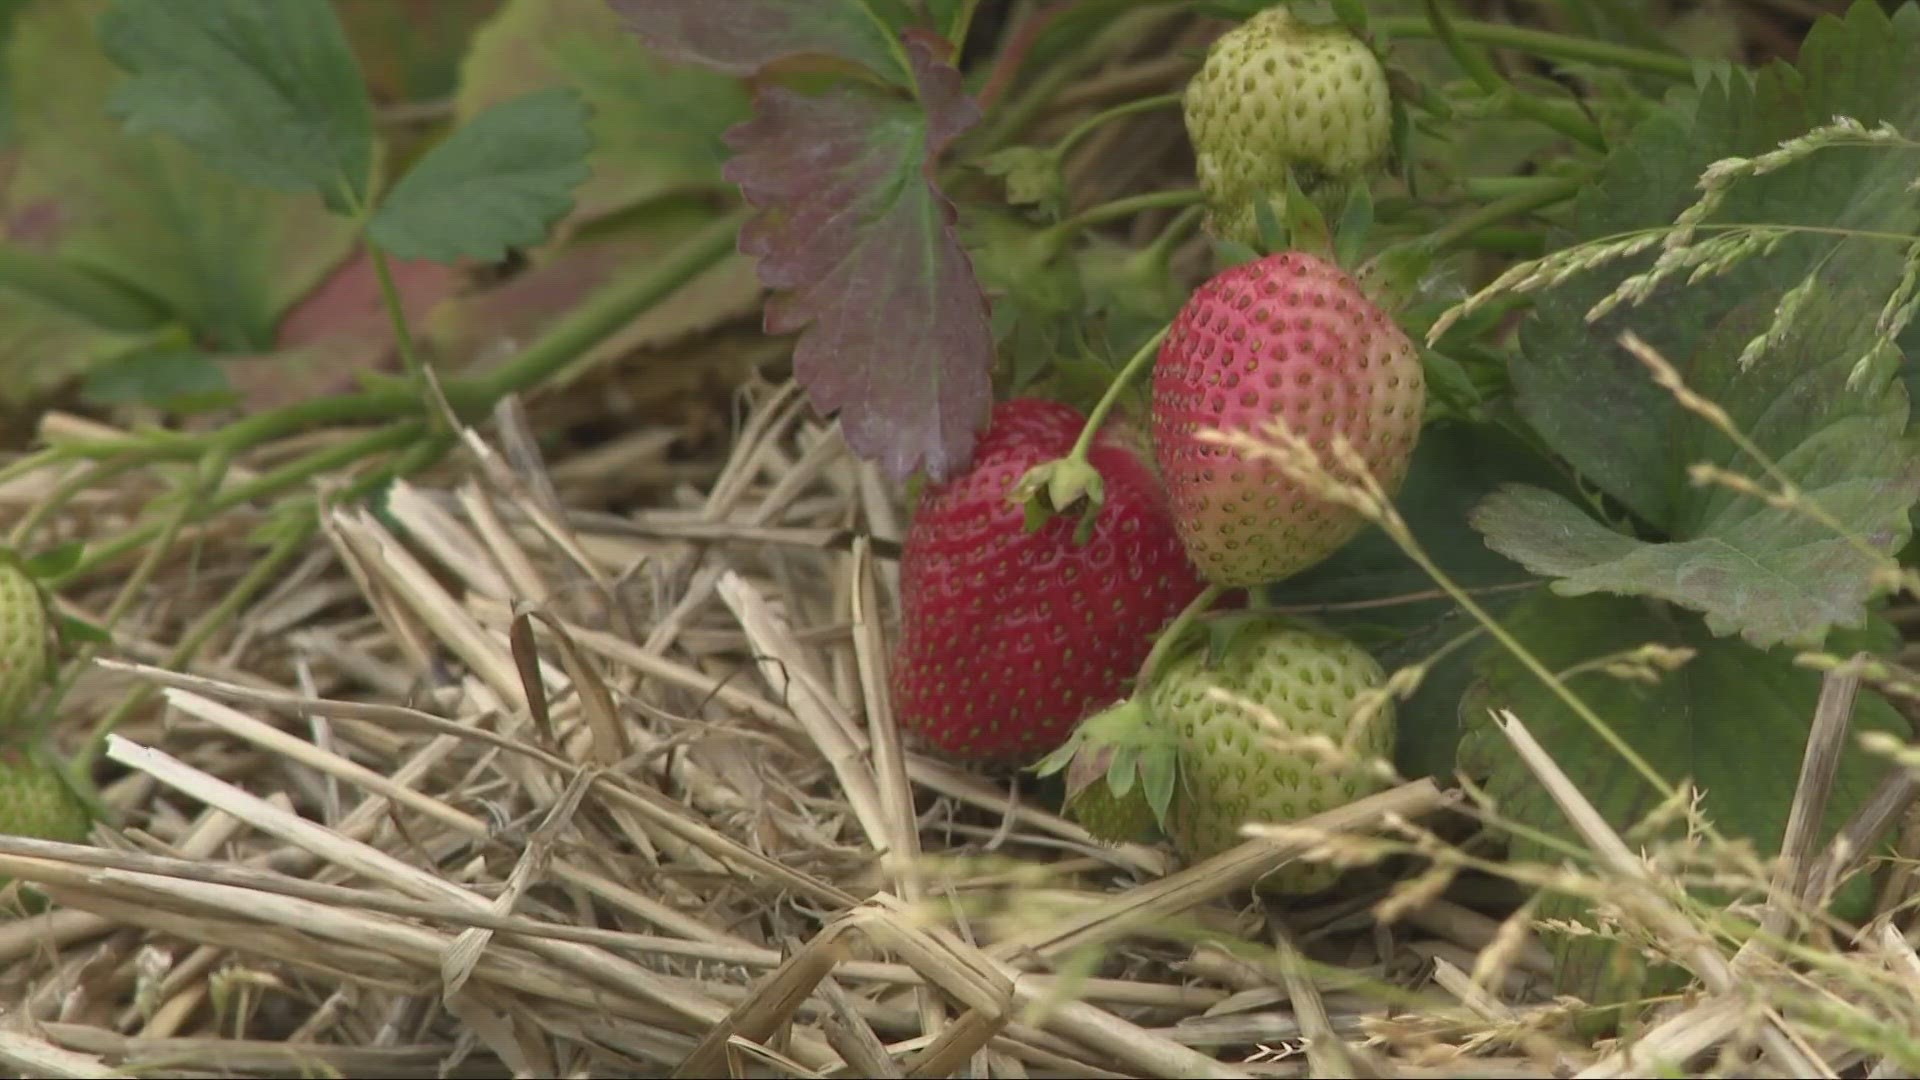 Farmers throughout Northeast Ohio are seeing the impact of drought on crops like berries and corn after nearly three weeks of no rain.